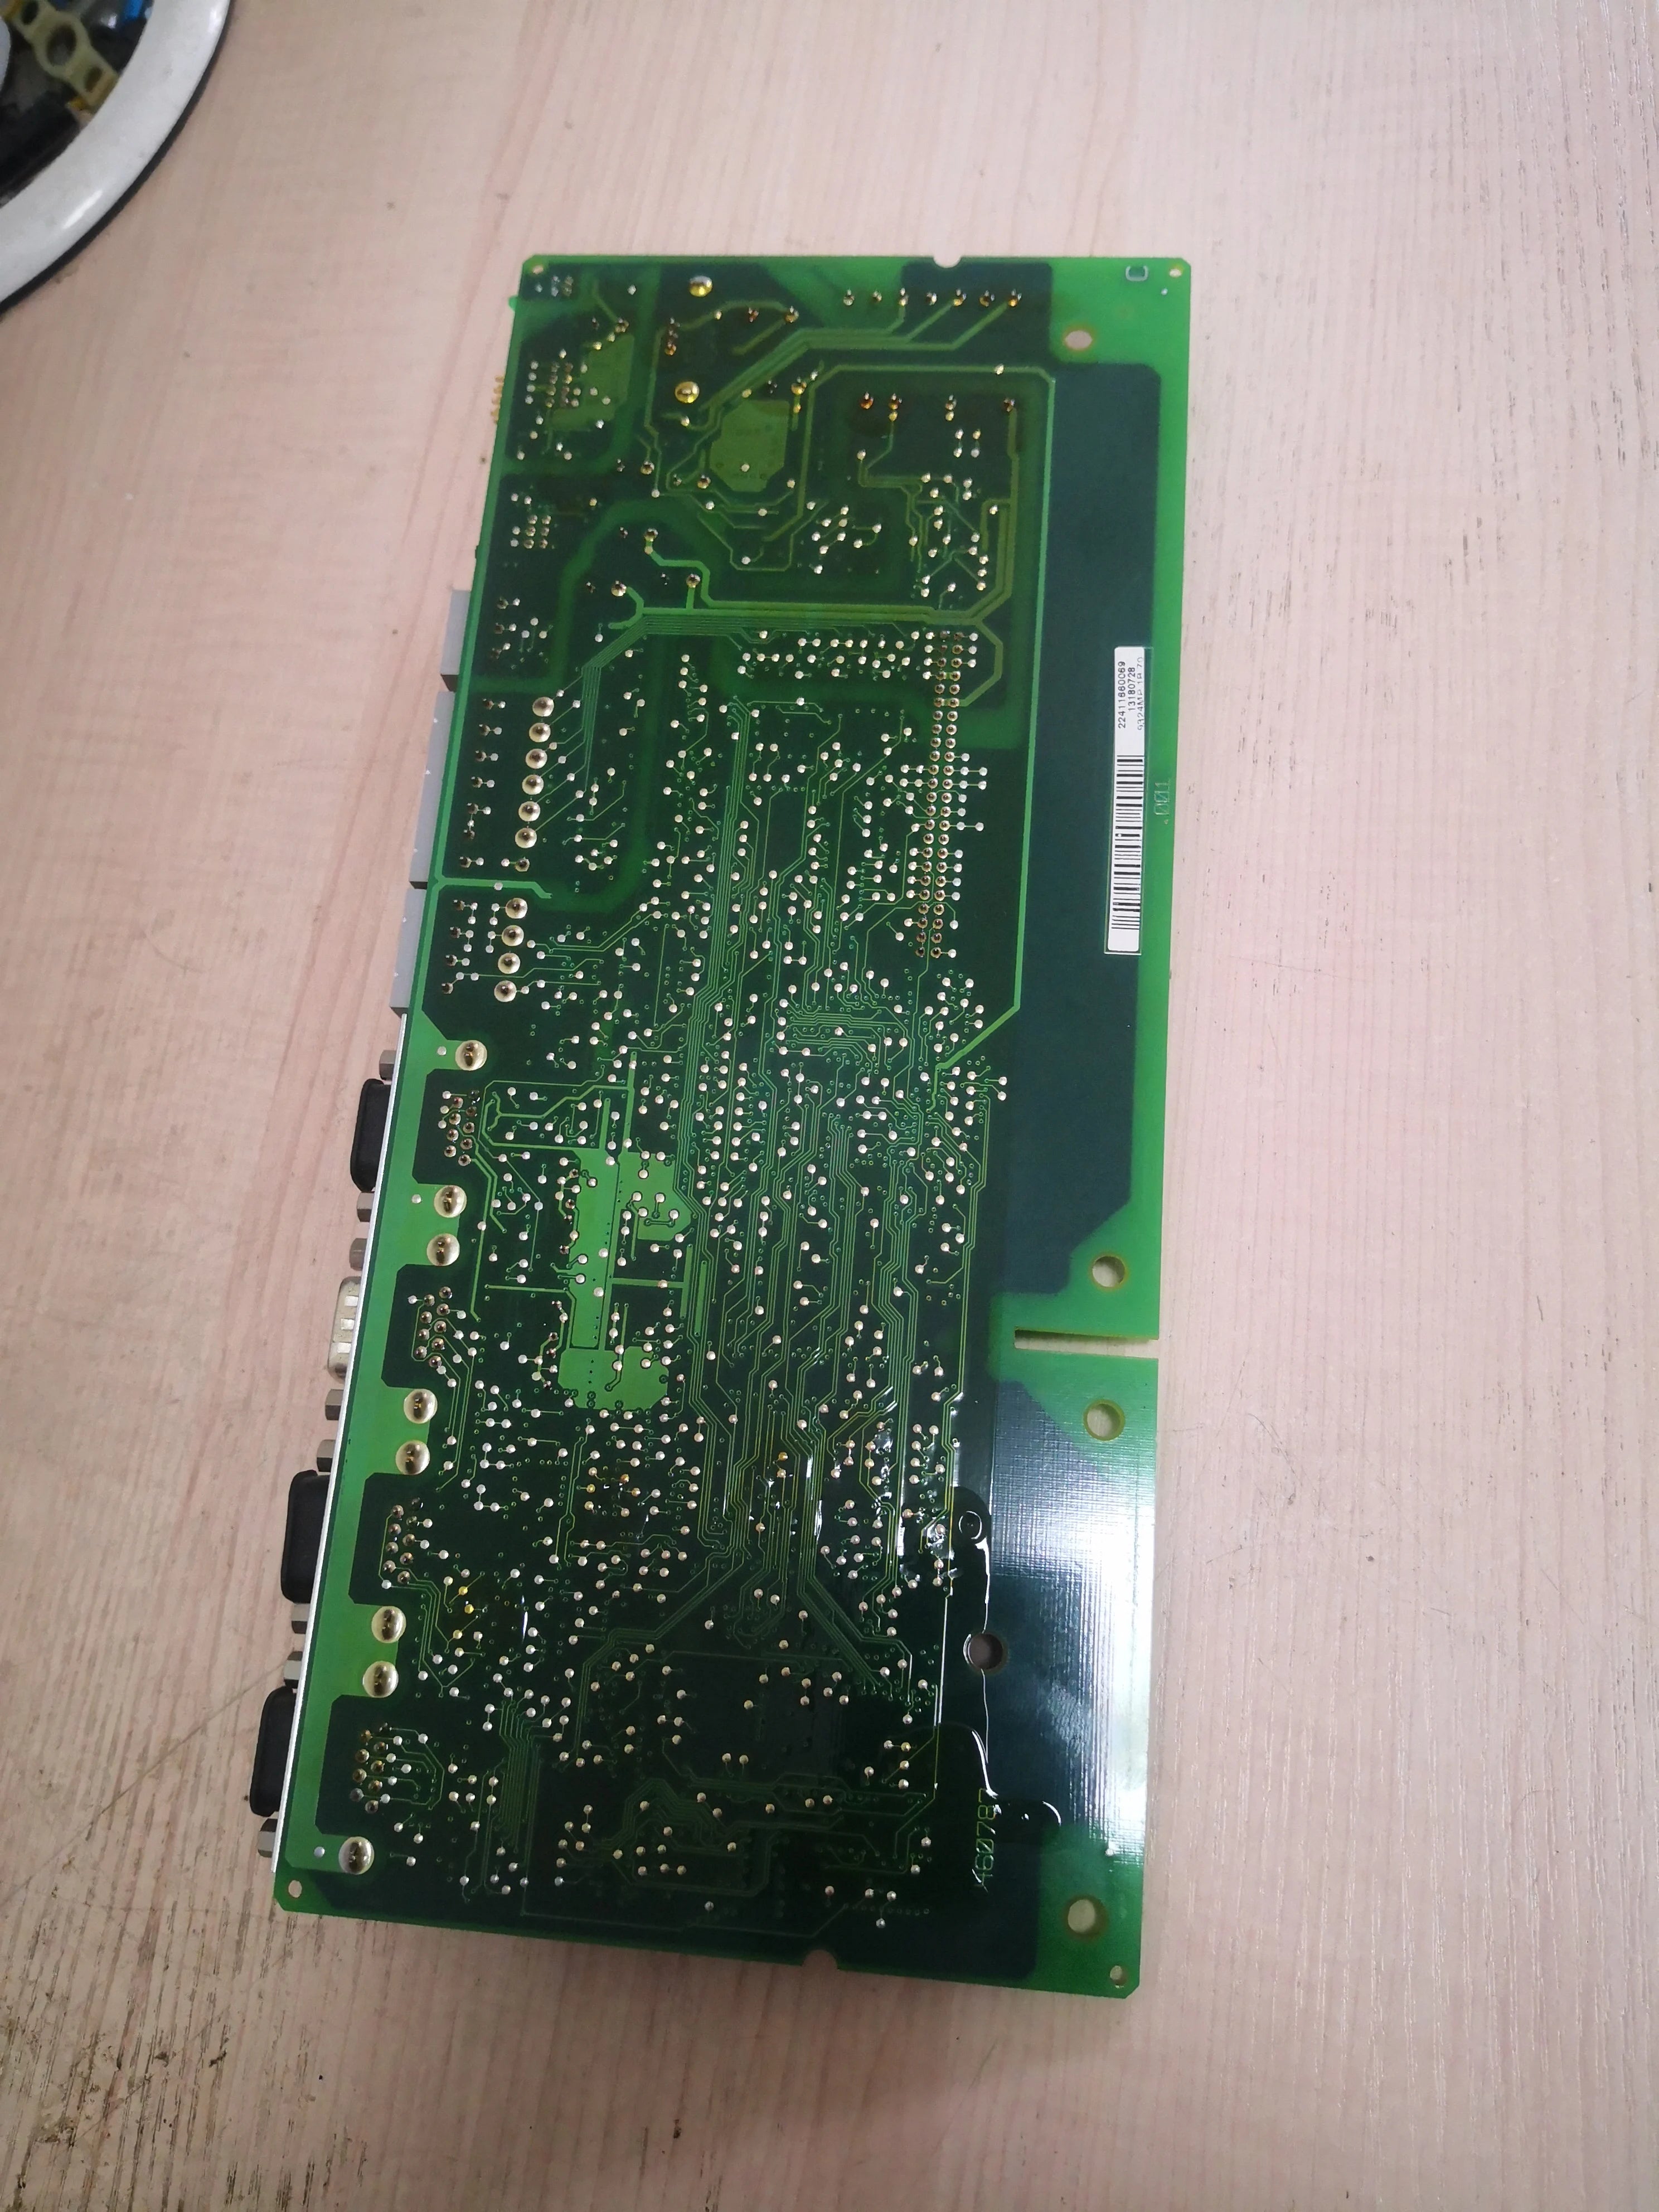 For 9324MP 9325MP 9325MP.1B.73 9324MP.2G.81 9324MP.PB.06-V011 Motherboard Used In Good Condition